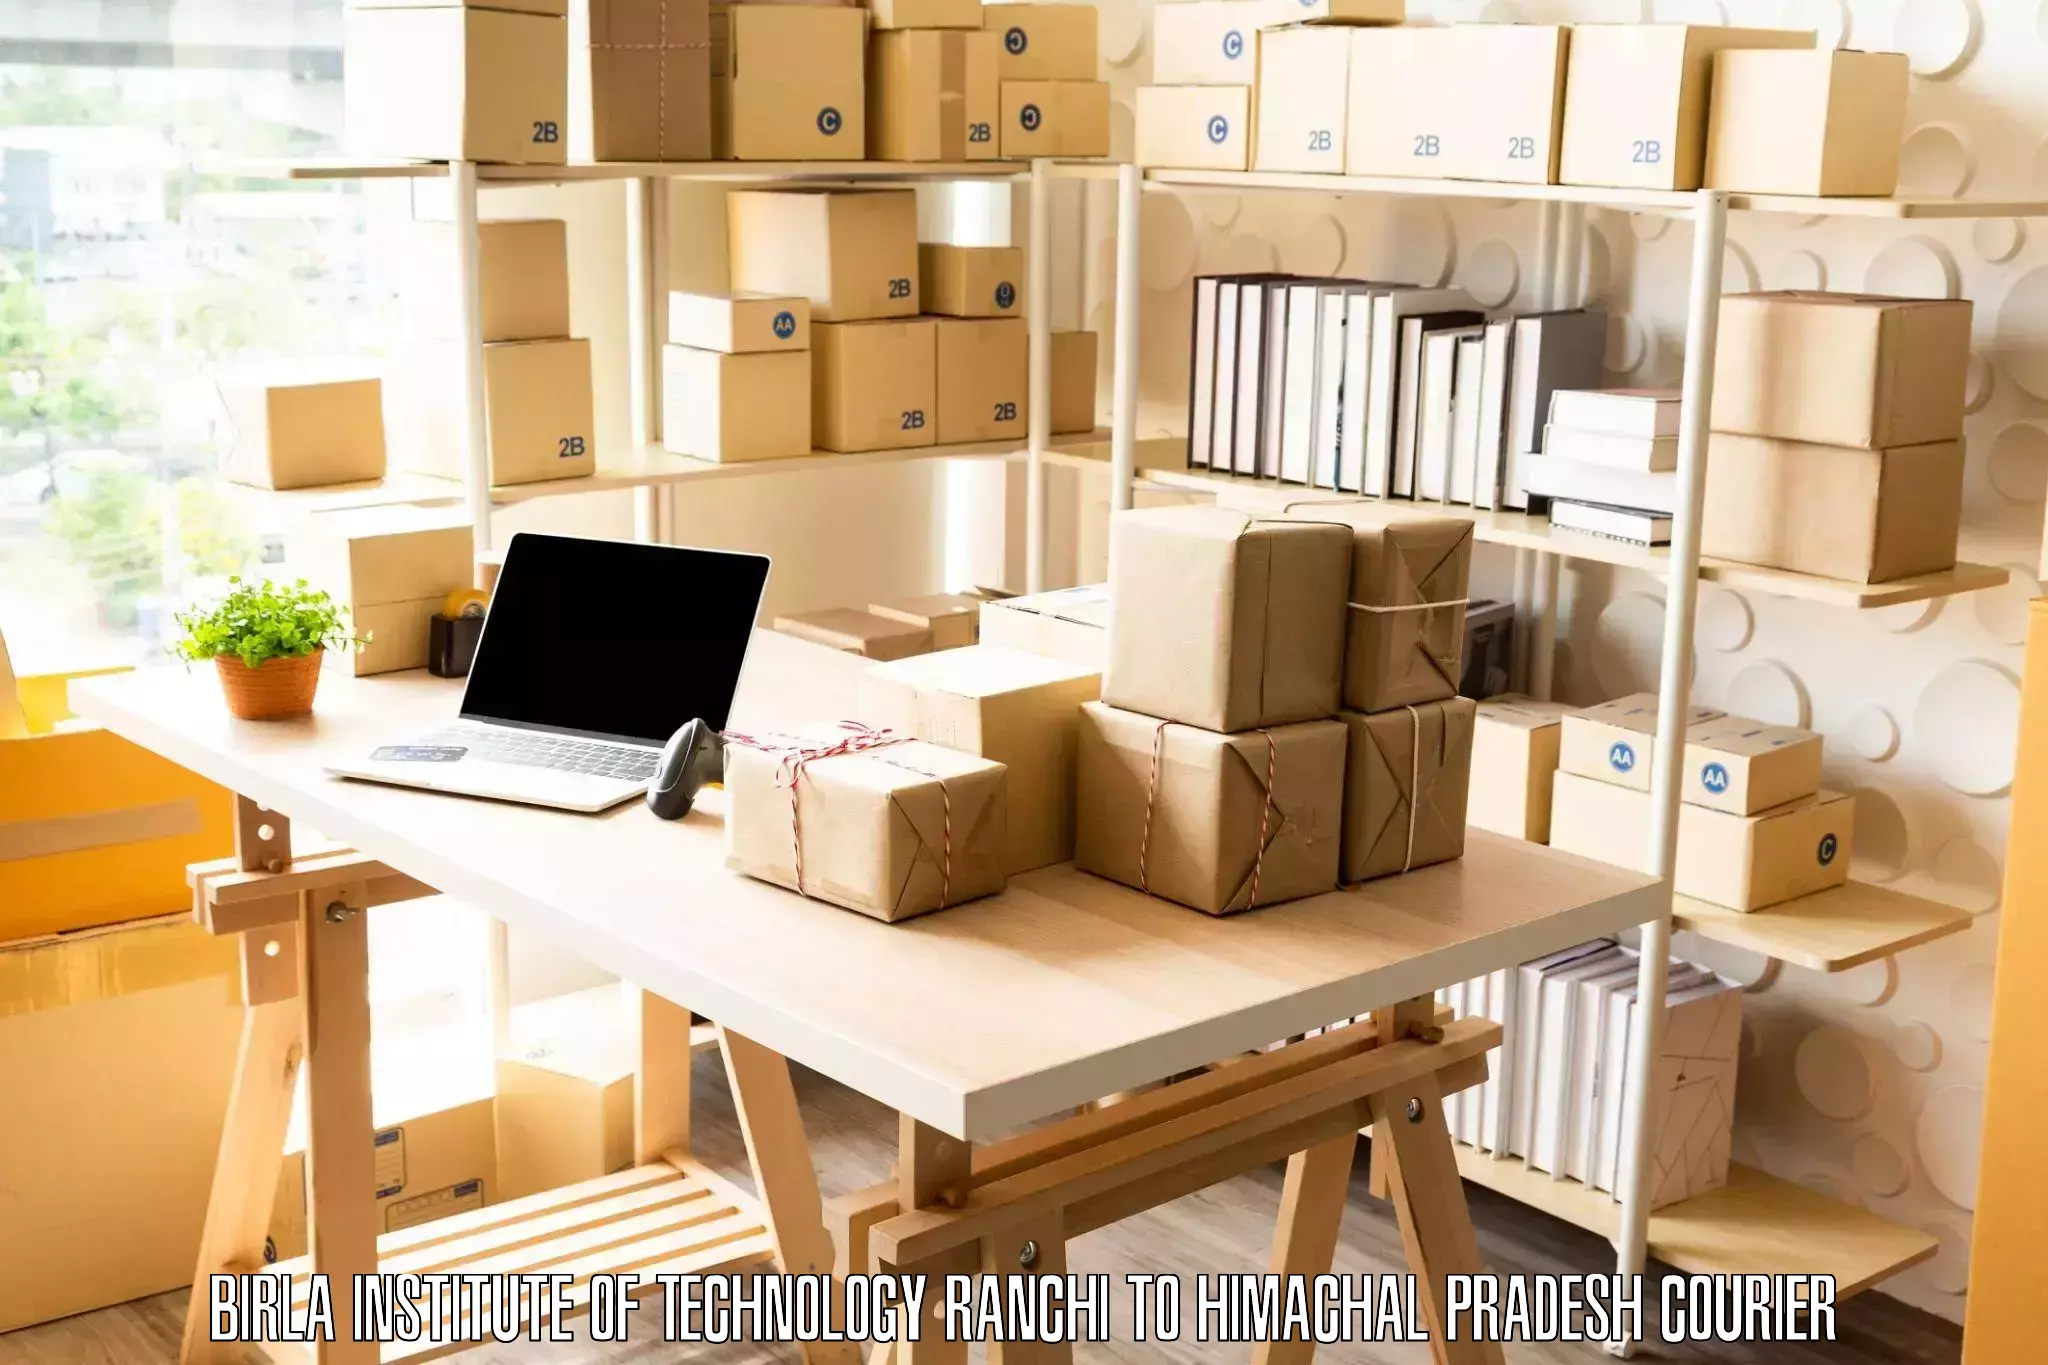 Furniture moving plans Birla Institute of Technology Ranchi to NIT Hamirpur